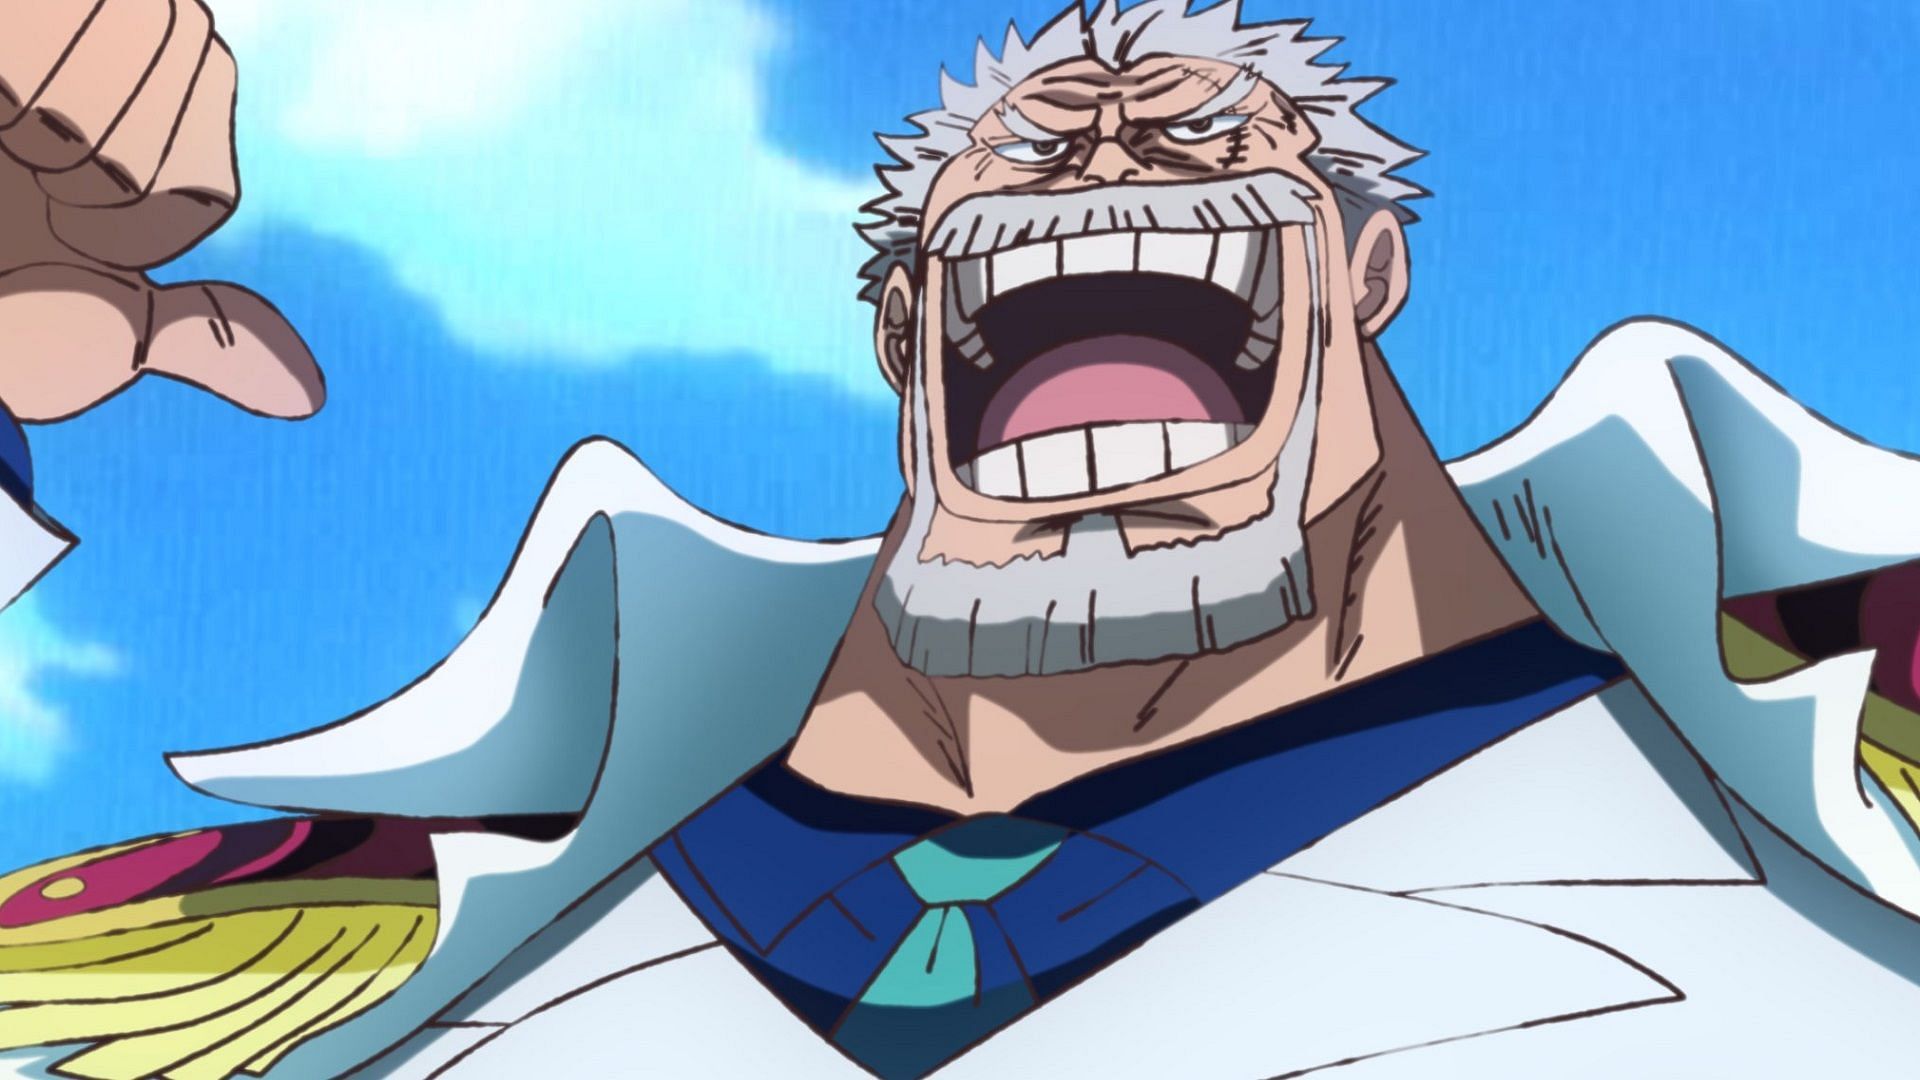 The situation is not easy, but Garp must hang on (Image via Toei Animation, One Piece)